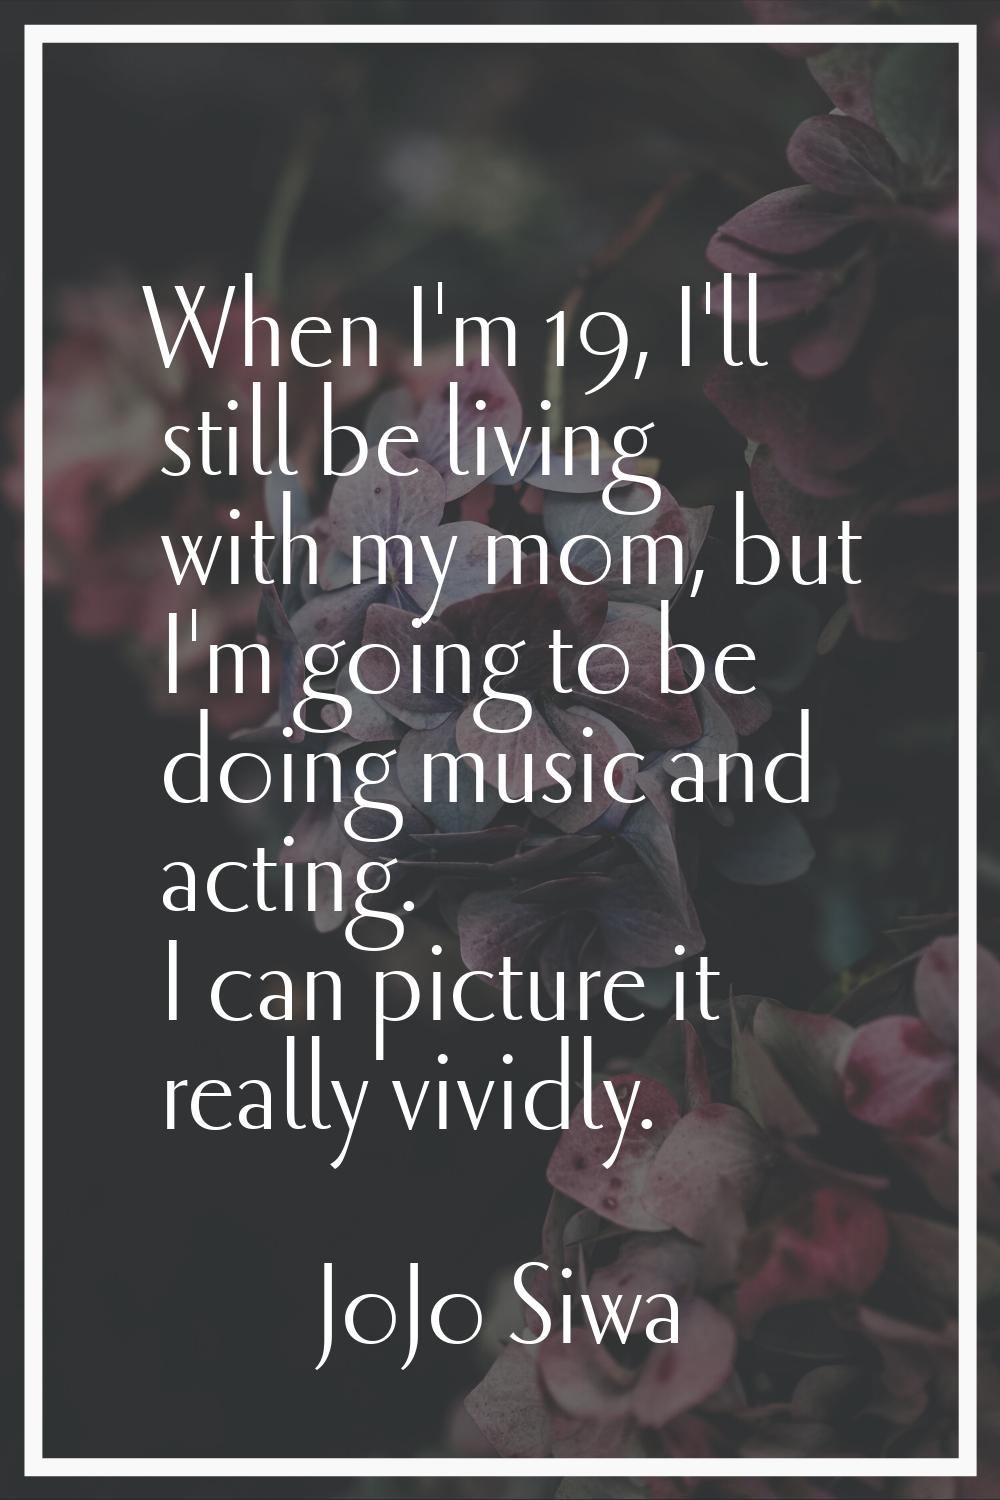 When I'm 19, I'll still be living with my mom, but I'm going to be doing music and acting. I can pi